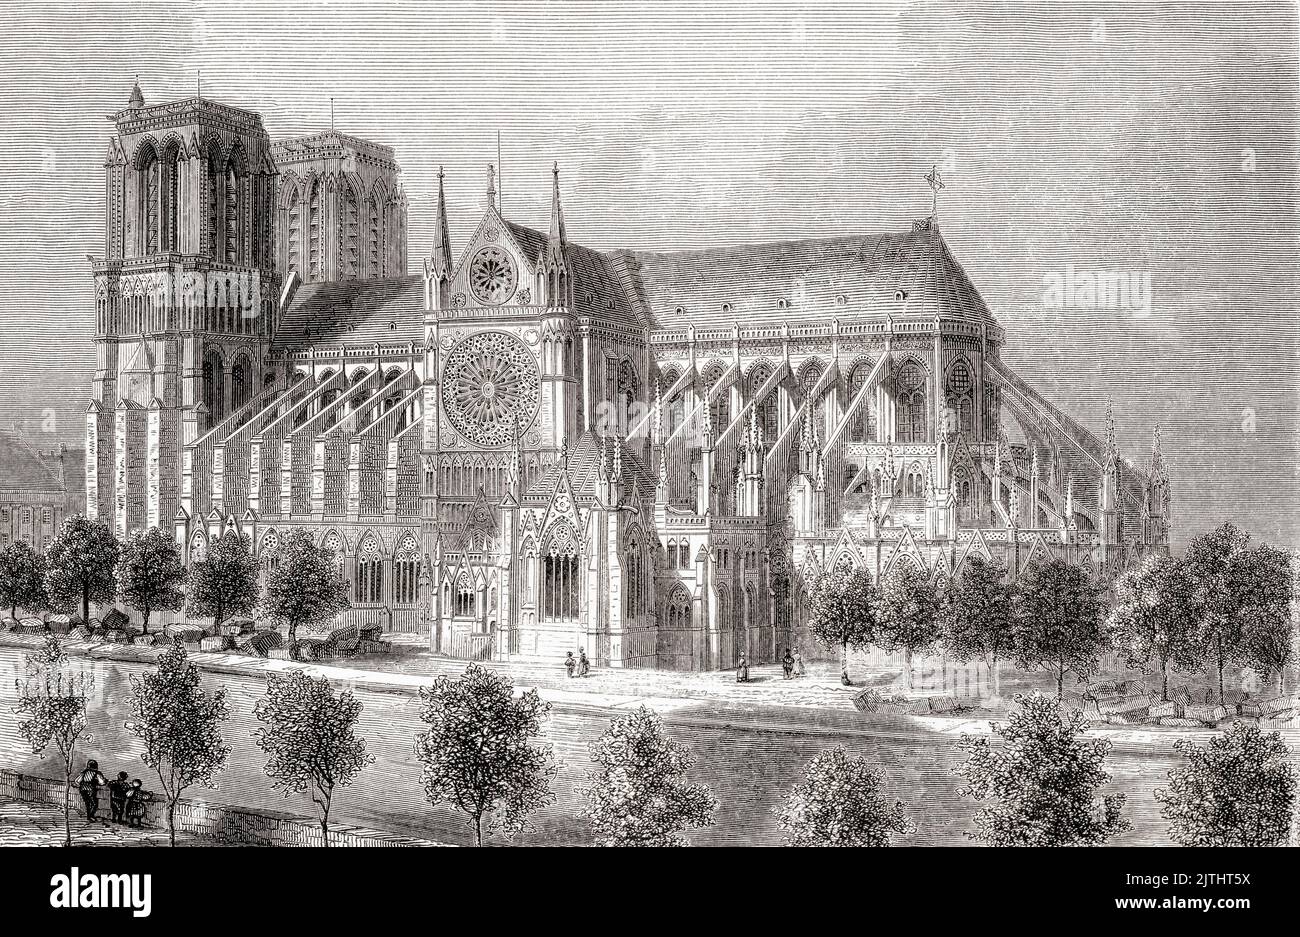 Notre-Dame de Paris,  Île de la Cité, Paris, France, seen here in the 19th century before the addition of the spire. It was built between 1163 and 1345 in the French Gothic architectural style. Architects Jean-Baptiste Lassus and Eugène Viollet-le-Duc were appointed in 1844 to restore the cathedral after its fall into disrepair in the decades following the Napoleonic Wars.  From Les Plus Belles Eglises du Monde, published 1861. Stock Photo